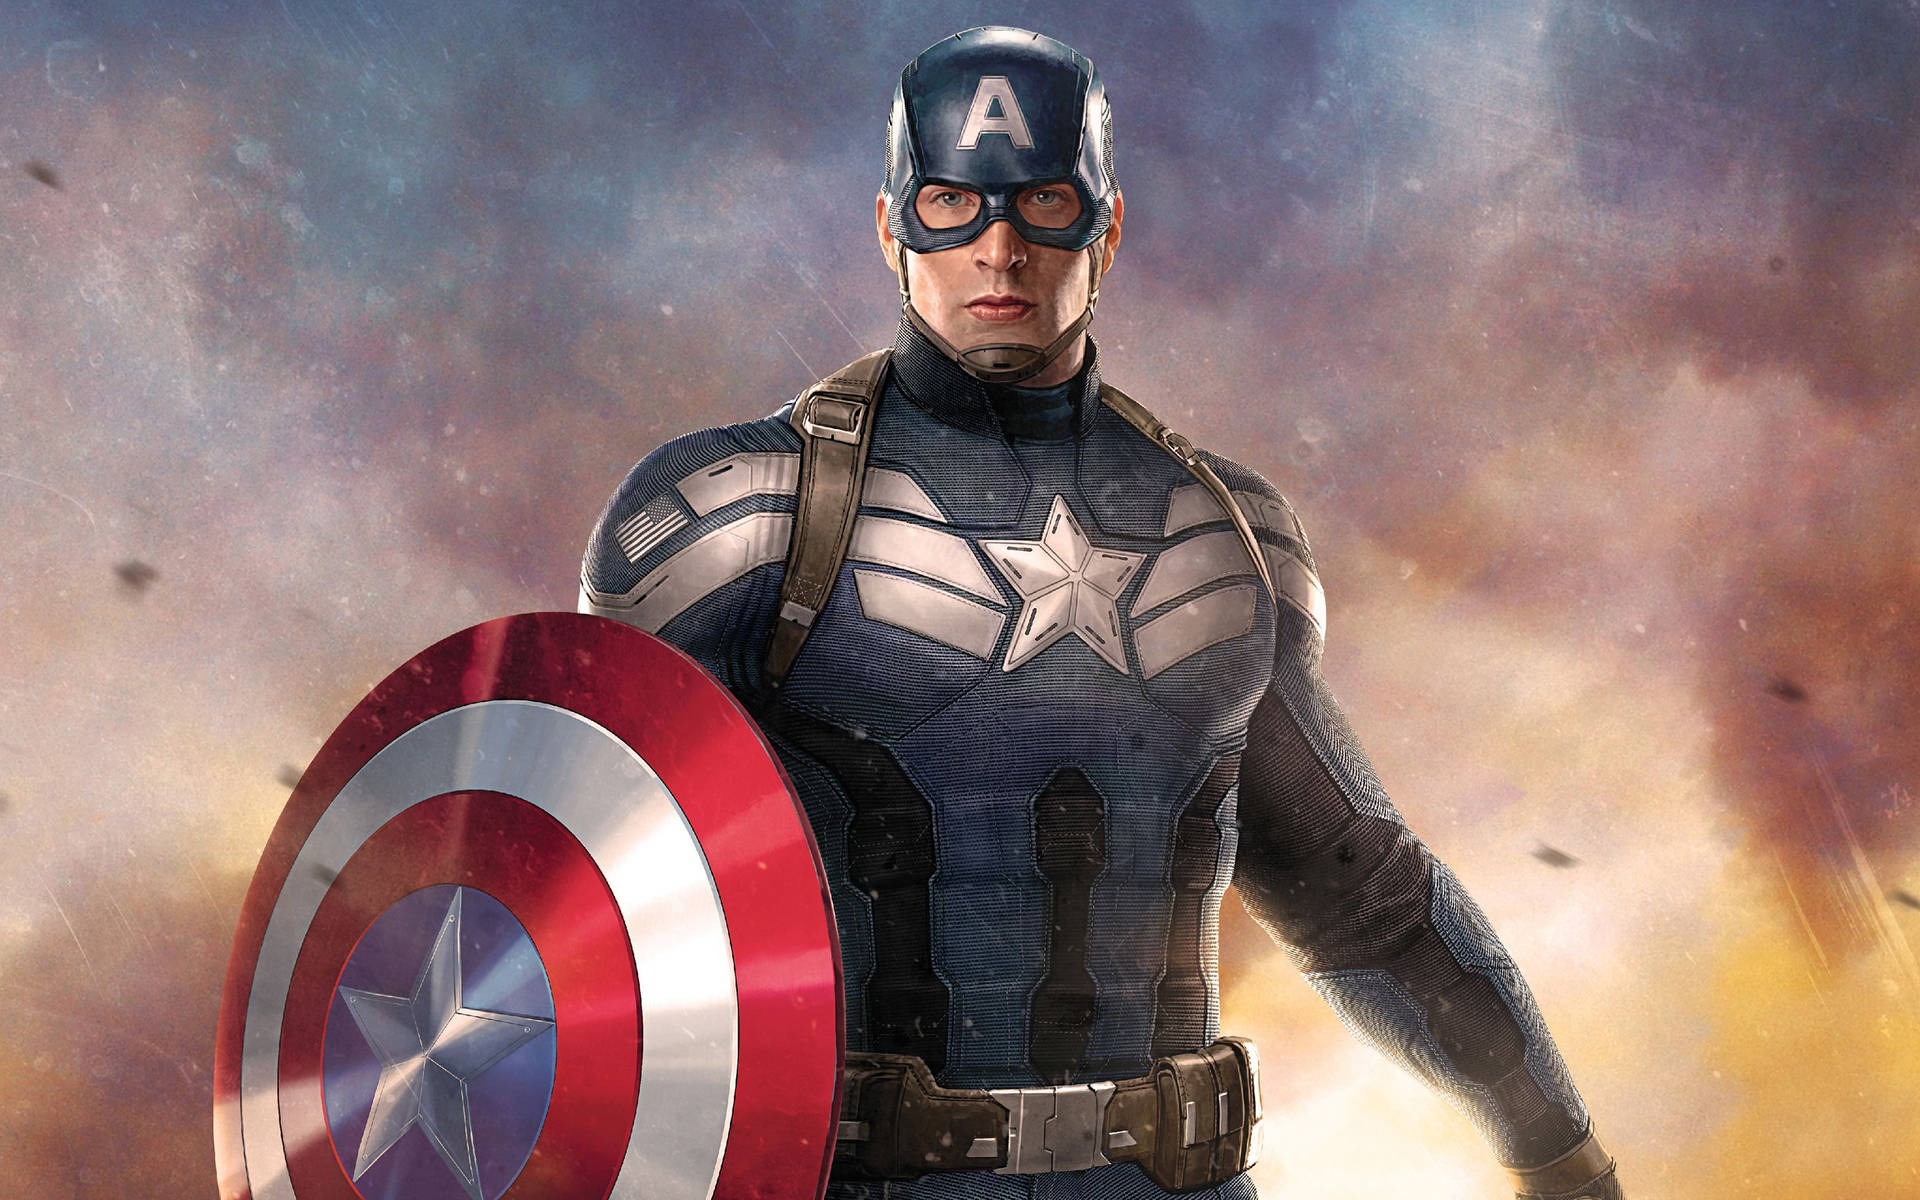 Behold the power of Captain America, the leader of the Avengers! Wallpaper